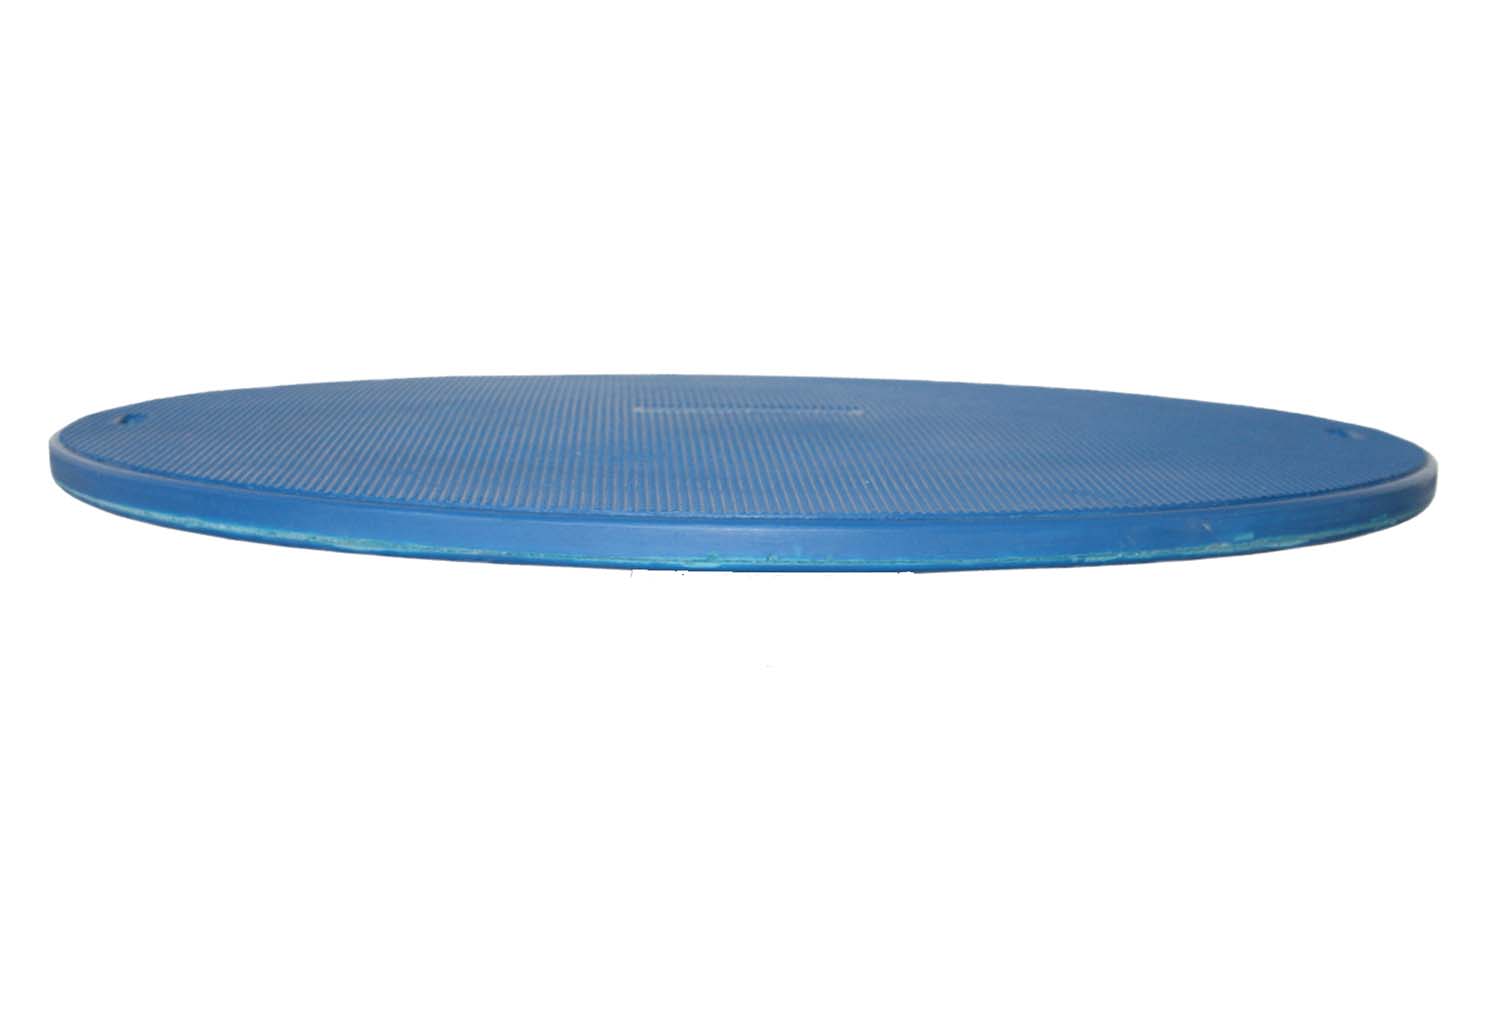 20" Circular Board for the Cando Stability Trainer